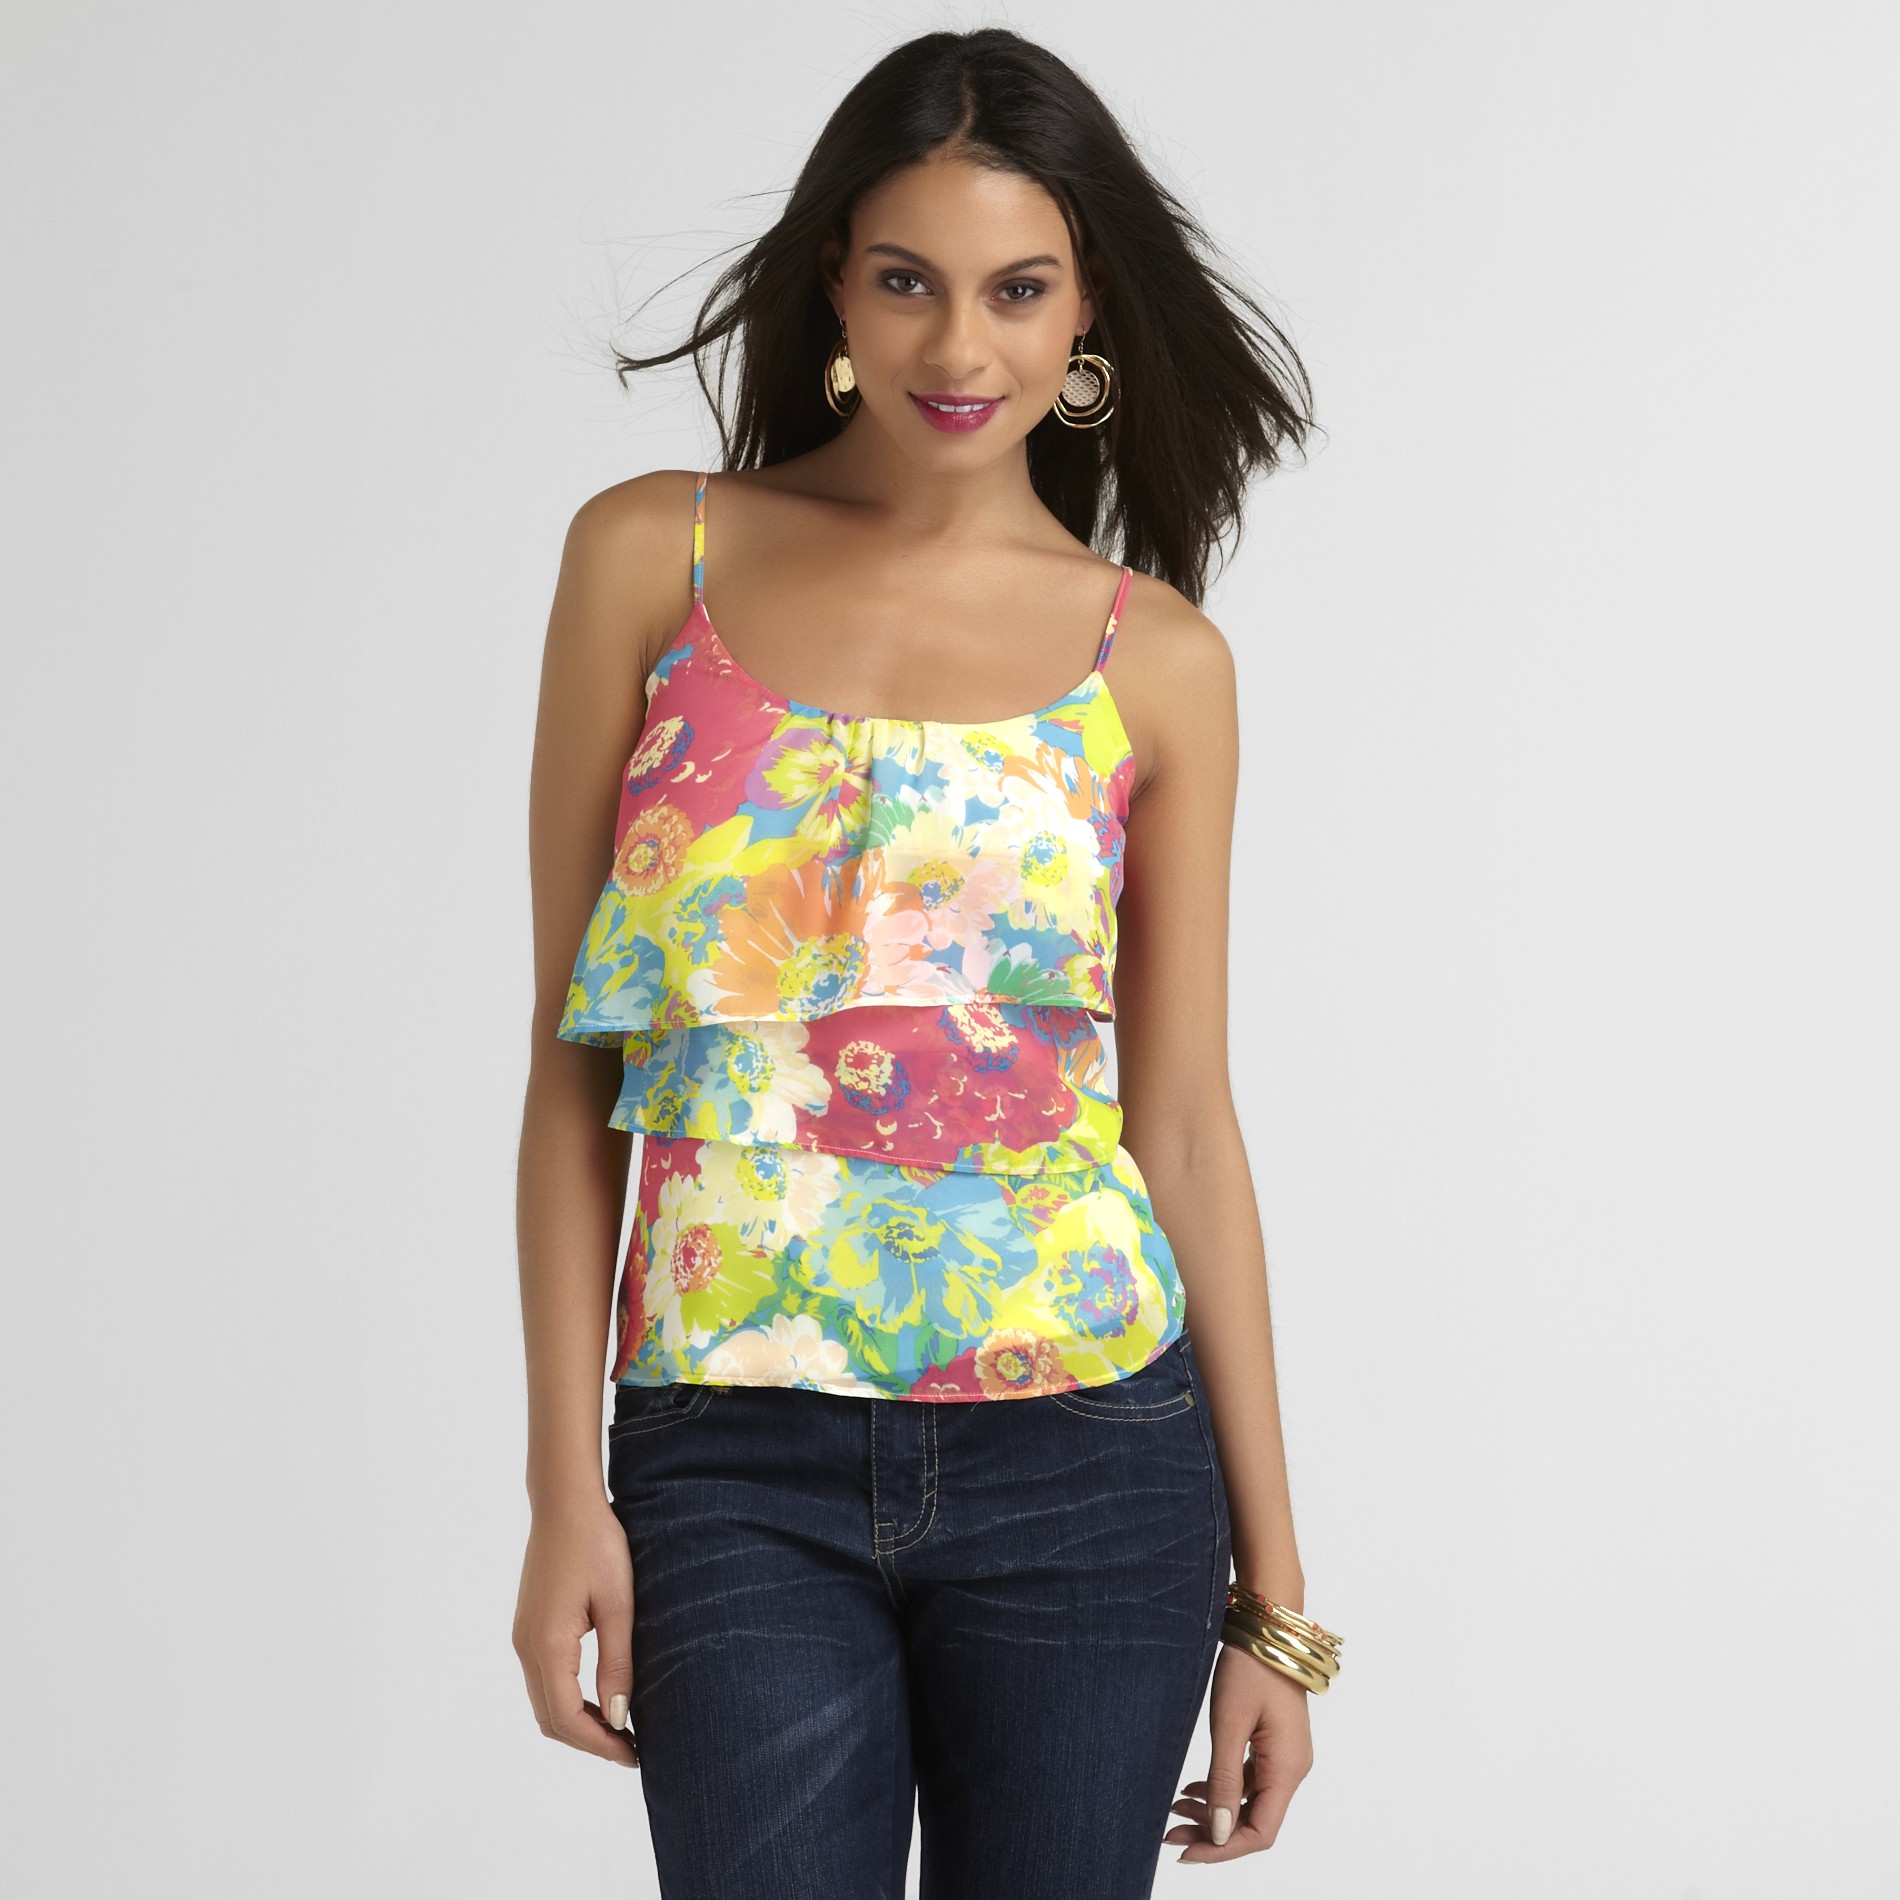 Cute Floral Top For Date Night